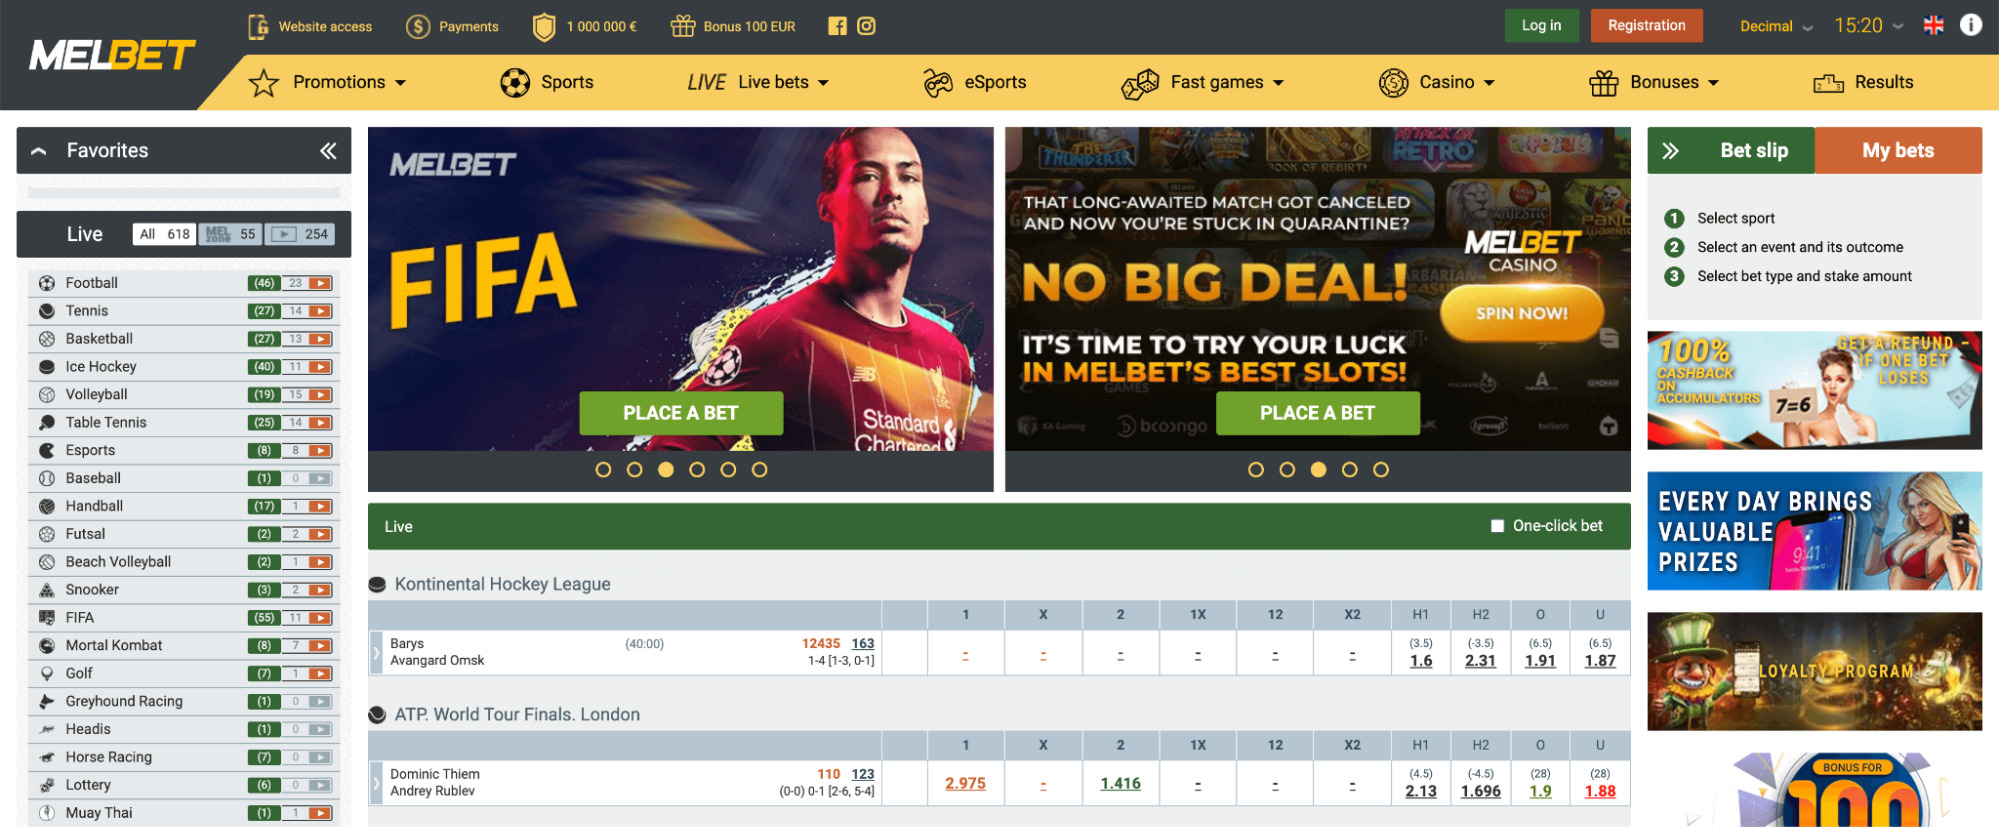 Melbet Main Page - Snapshot of the Melbet betting platform's homepage, demonstrating its user experience and offerings for Indian bettors in 2023.